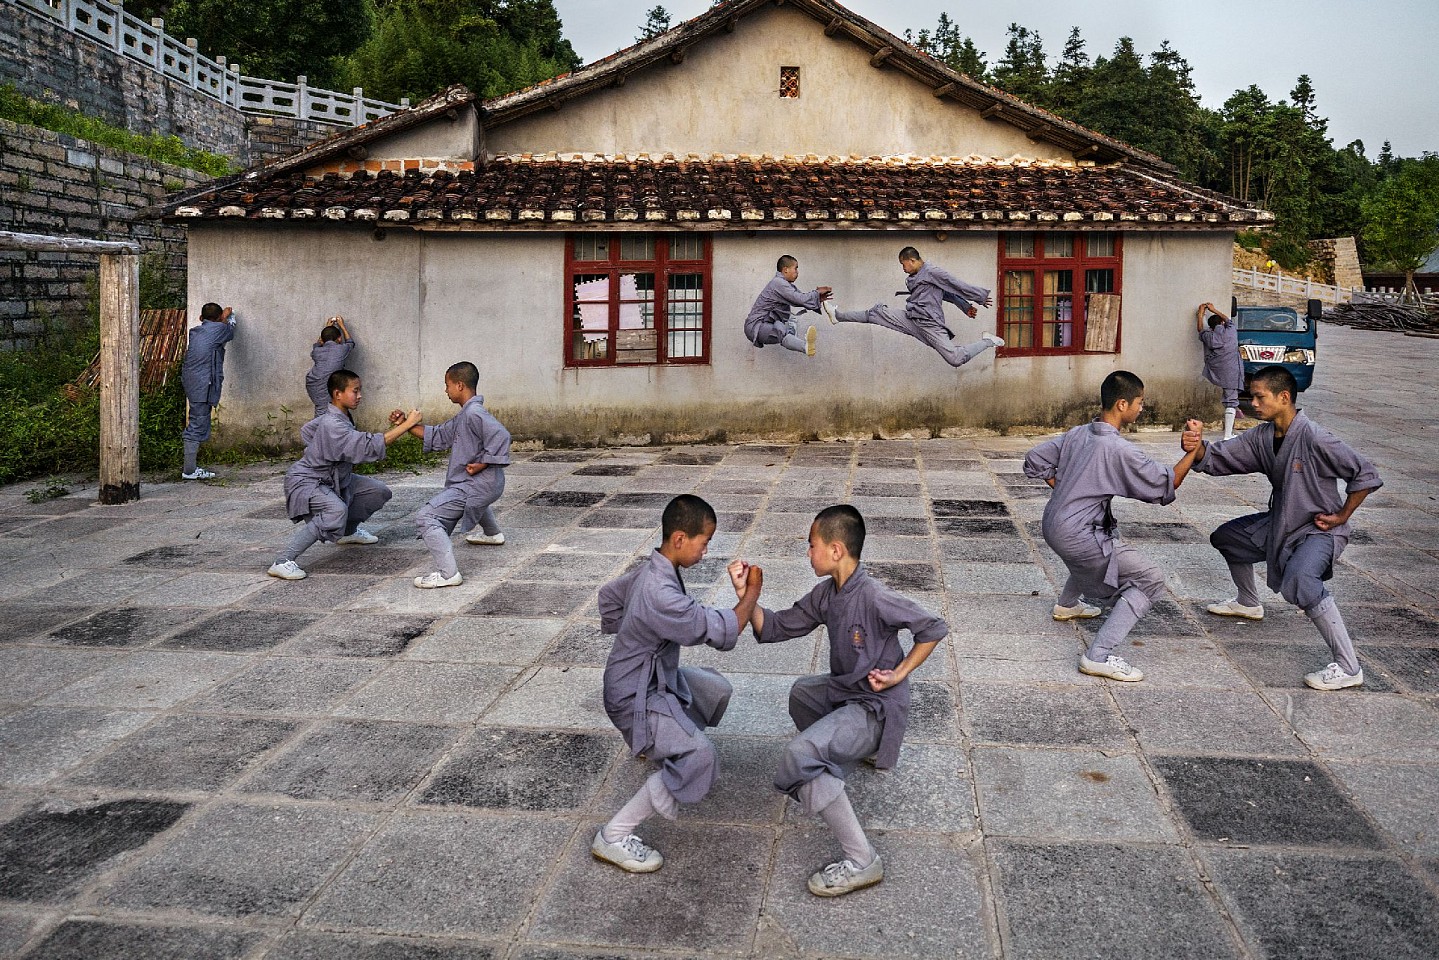 Steve McCurry, Young Practitioners of the Shaolin Tagou Martial Arts School, Ed. of 15
FujiFlex Crystal Archive Print, 30 x 40 in. (76.2 x 101.6 cm)
CHINA-10417